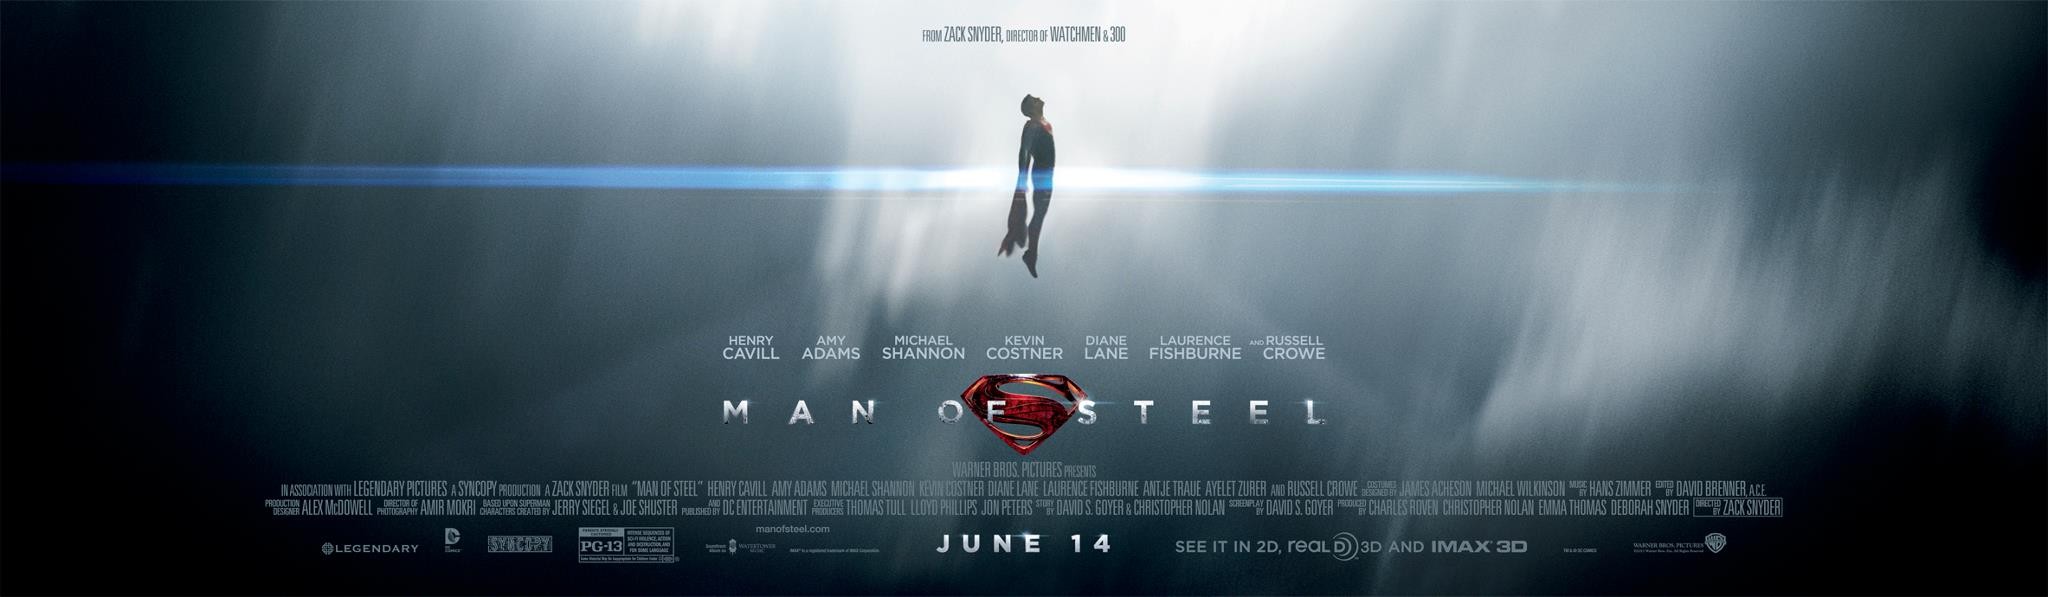 Mega Sized Movie Poster Image for Man of Steel (#5 of 16)